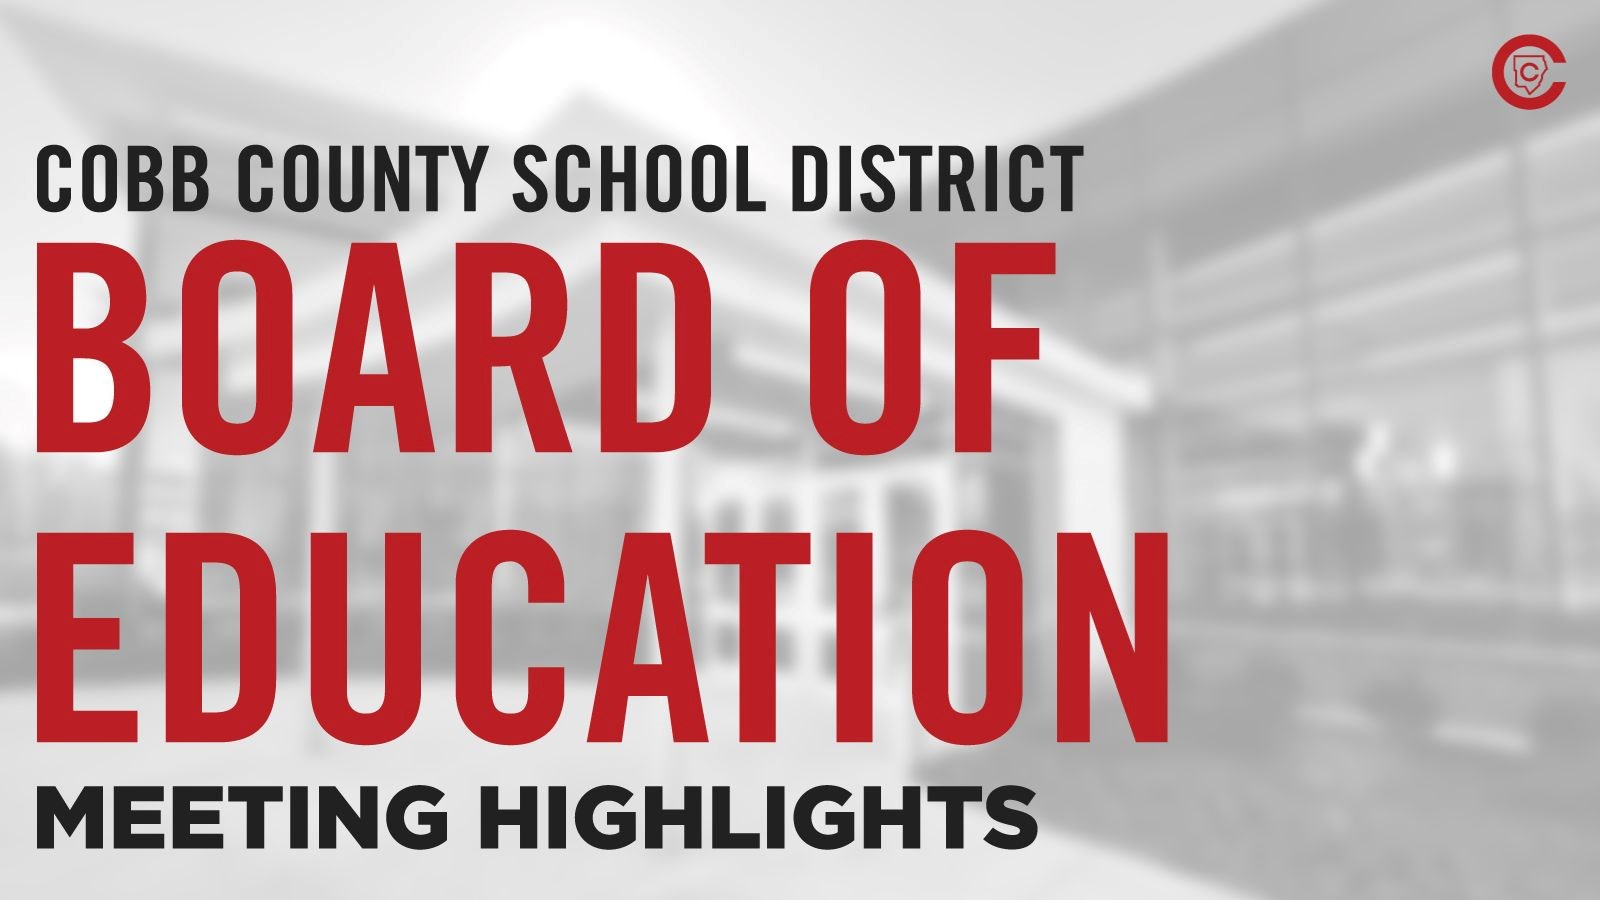 Board of Education meeting highlights